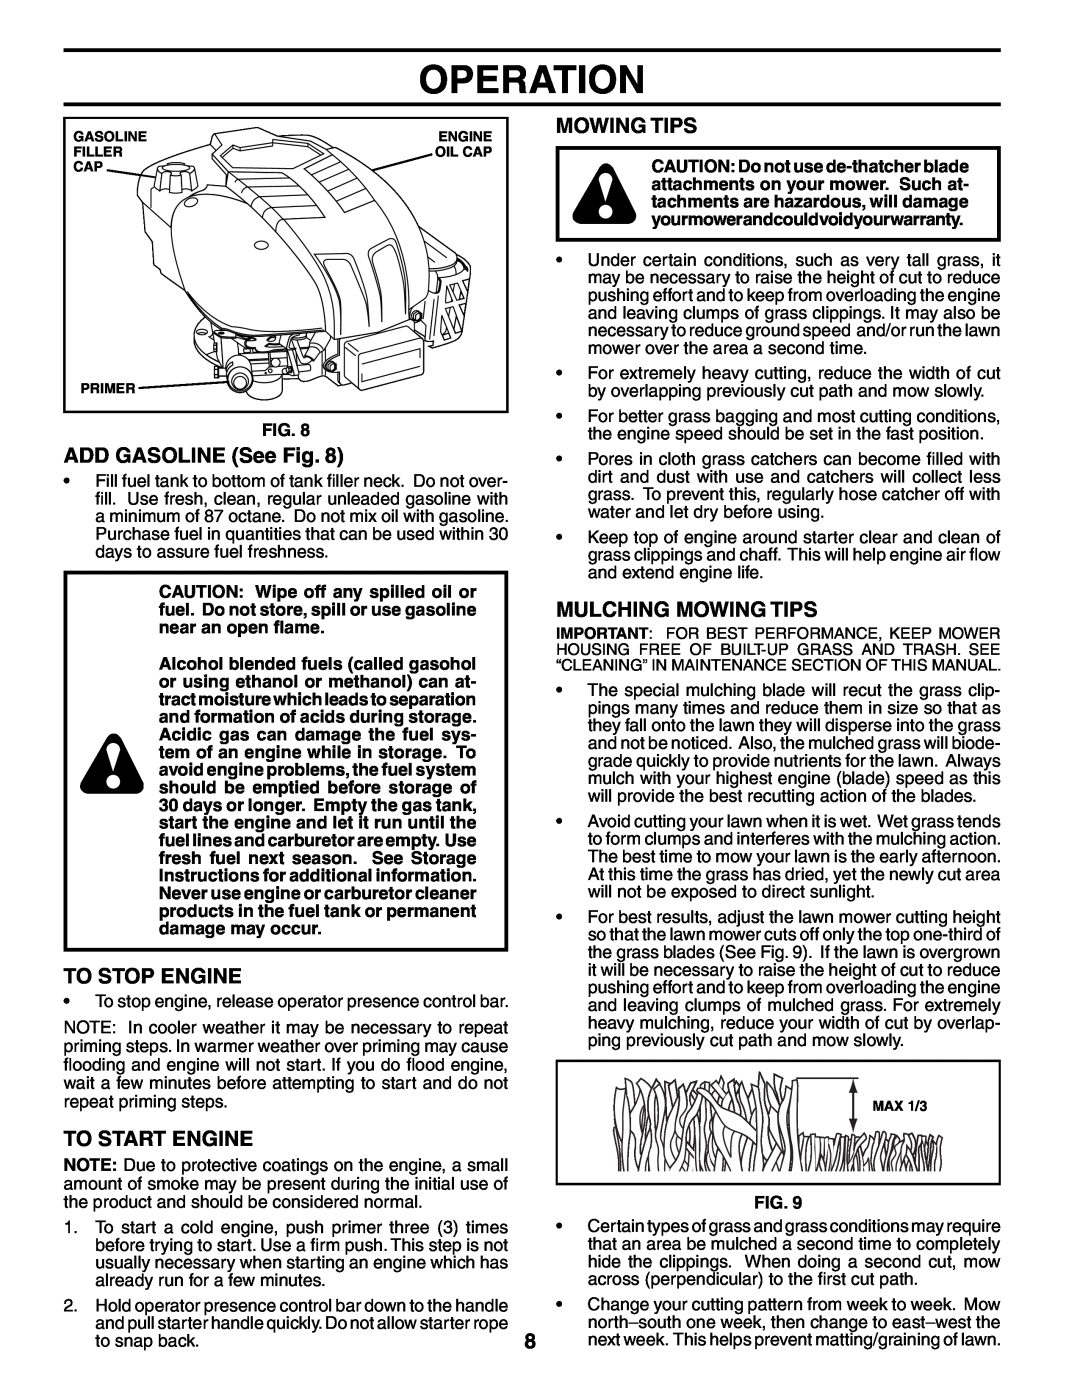 Husqvarna 7021CH1 owner manual ADD GASOLINE See Fig, To Stop Engine, To Start Engine, Mulching Mowing Tips, Operation 